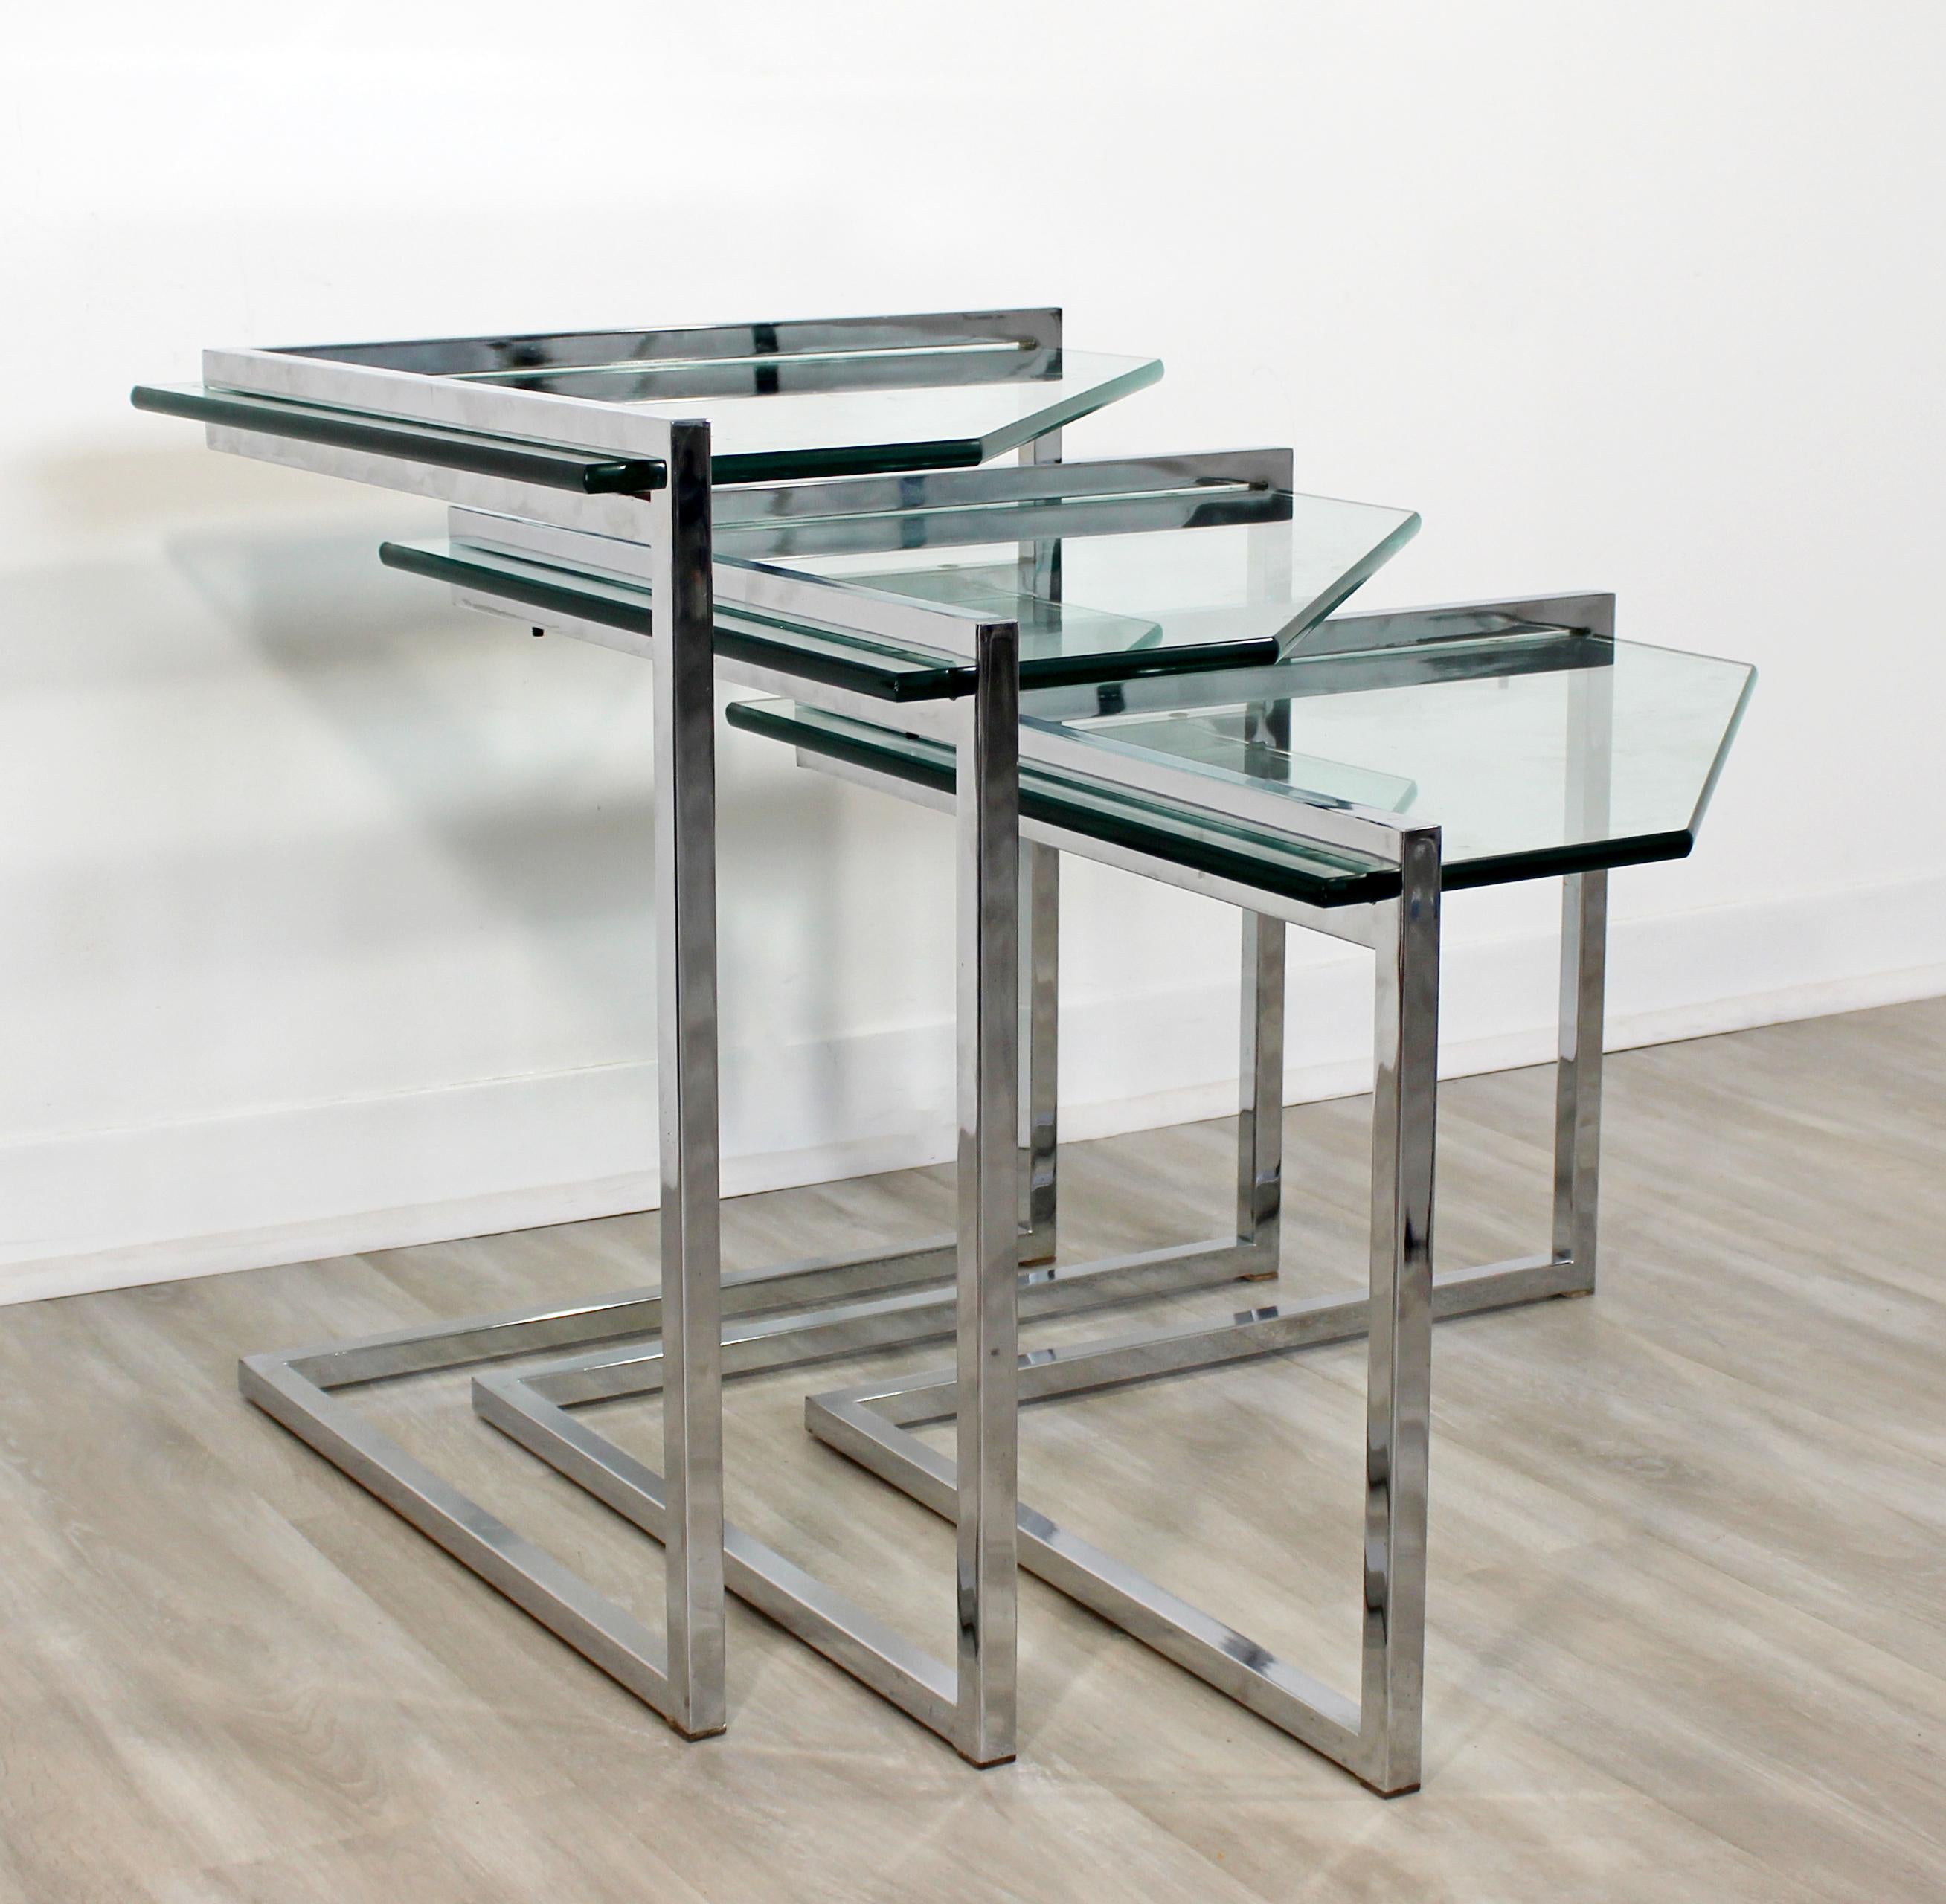 For your consideration is a fantastic set of three nesting tables, made of cantilever chrome and with glass inserts, circa the 1970s. In very good vintage condition. The dimensions of the three together are 28